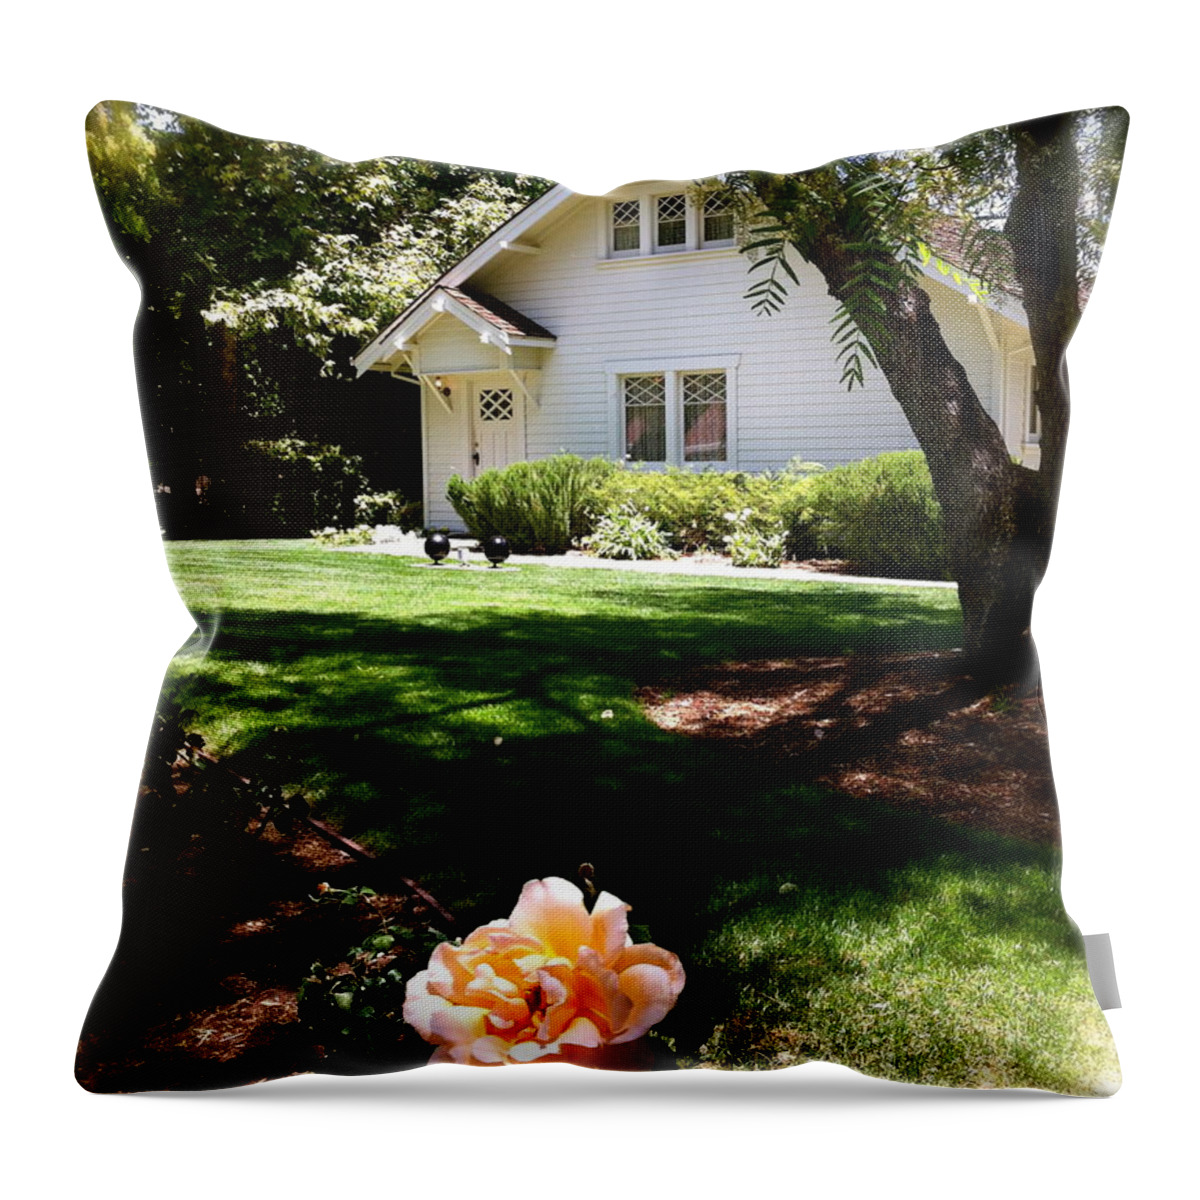 President Richard Nixon Collectibles Throw Pillow featuring the photograph President Nixon Home Richard Nixon by Iconic Images Art Gallery David Pucciarelli